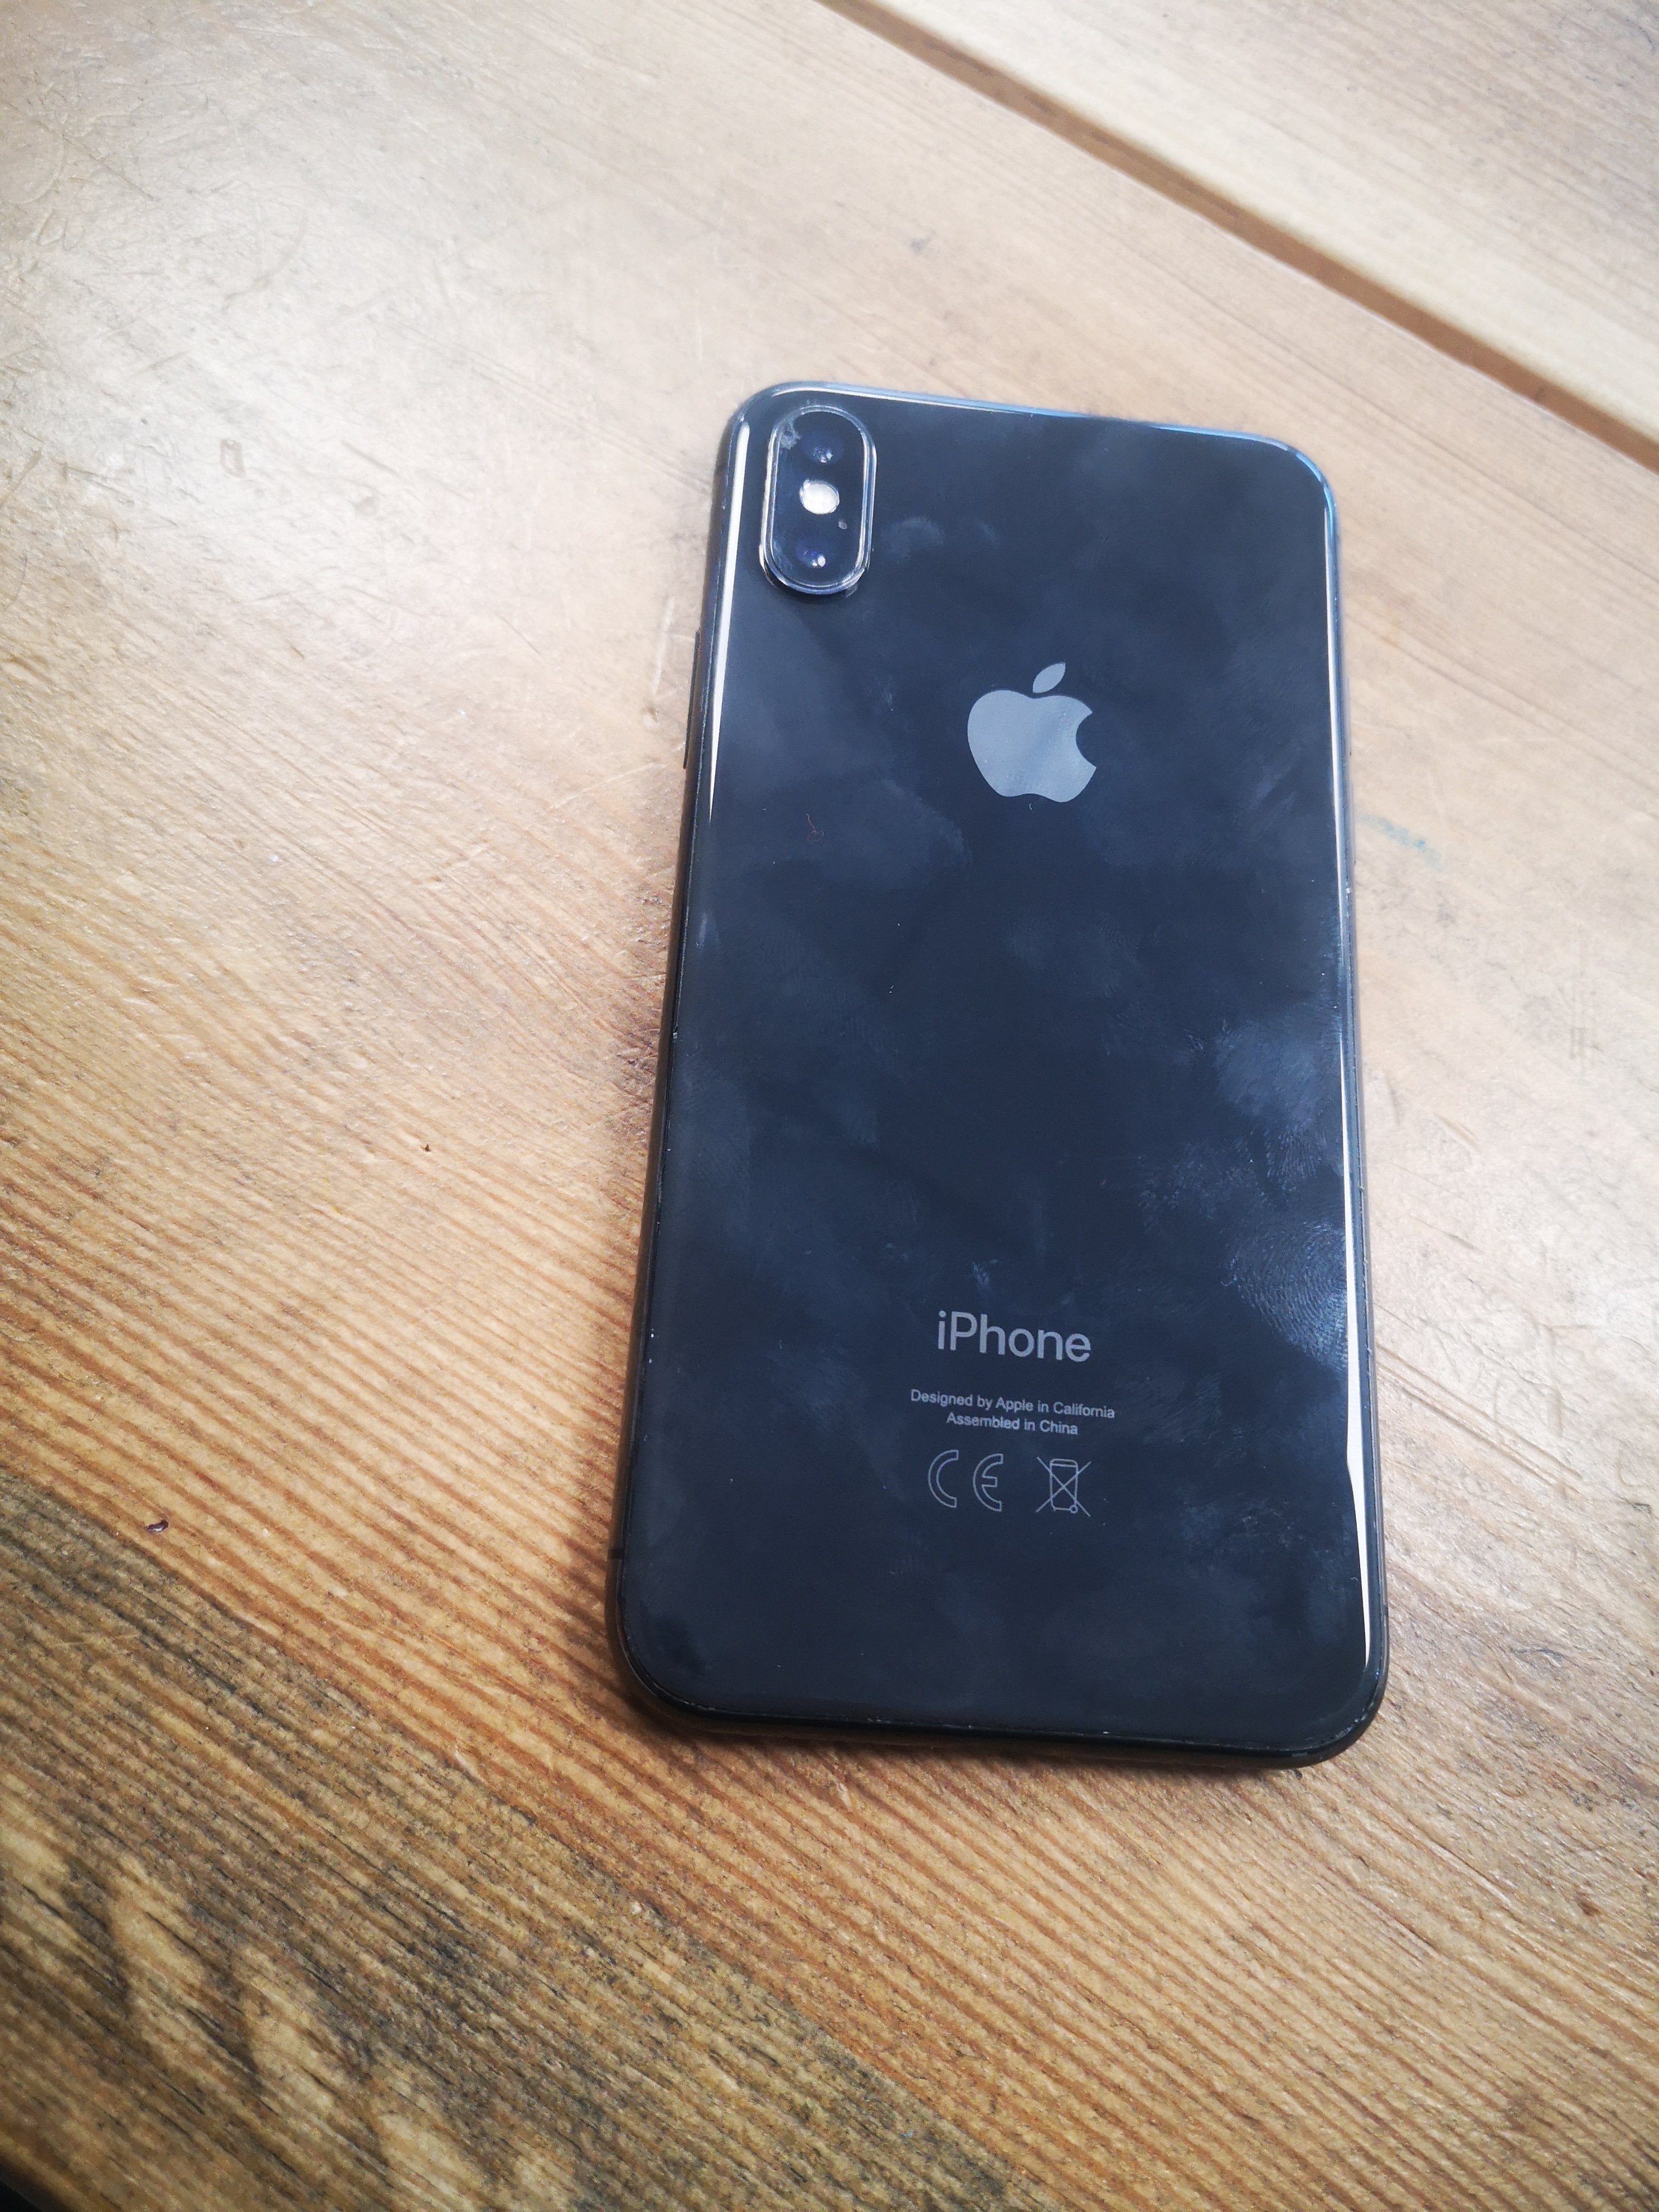 IPhone X / XR / XS / XS Max Back Glass replacement